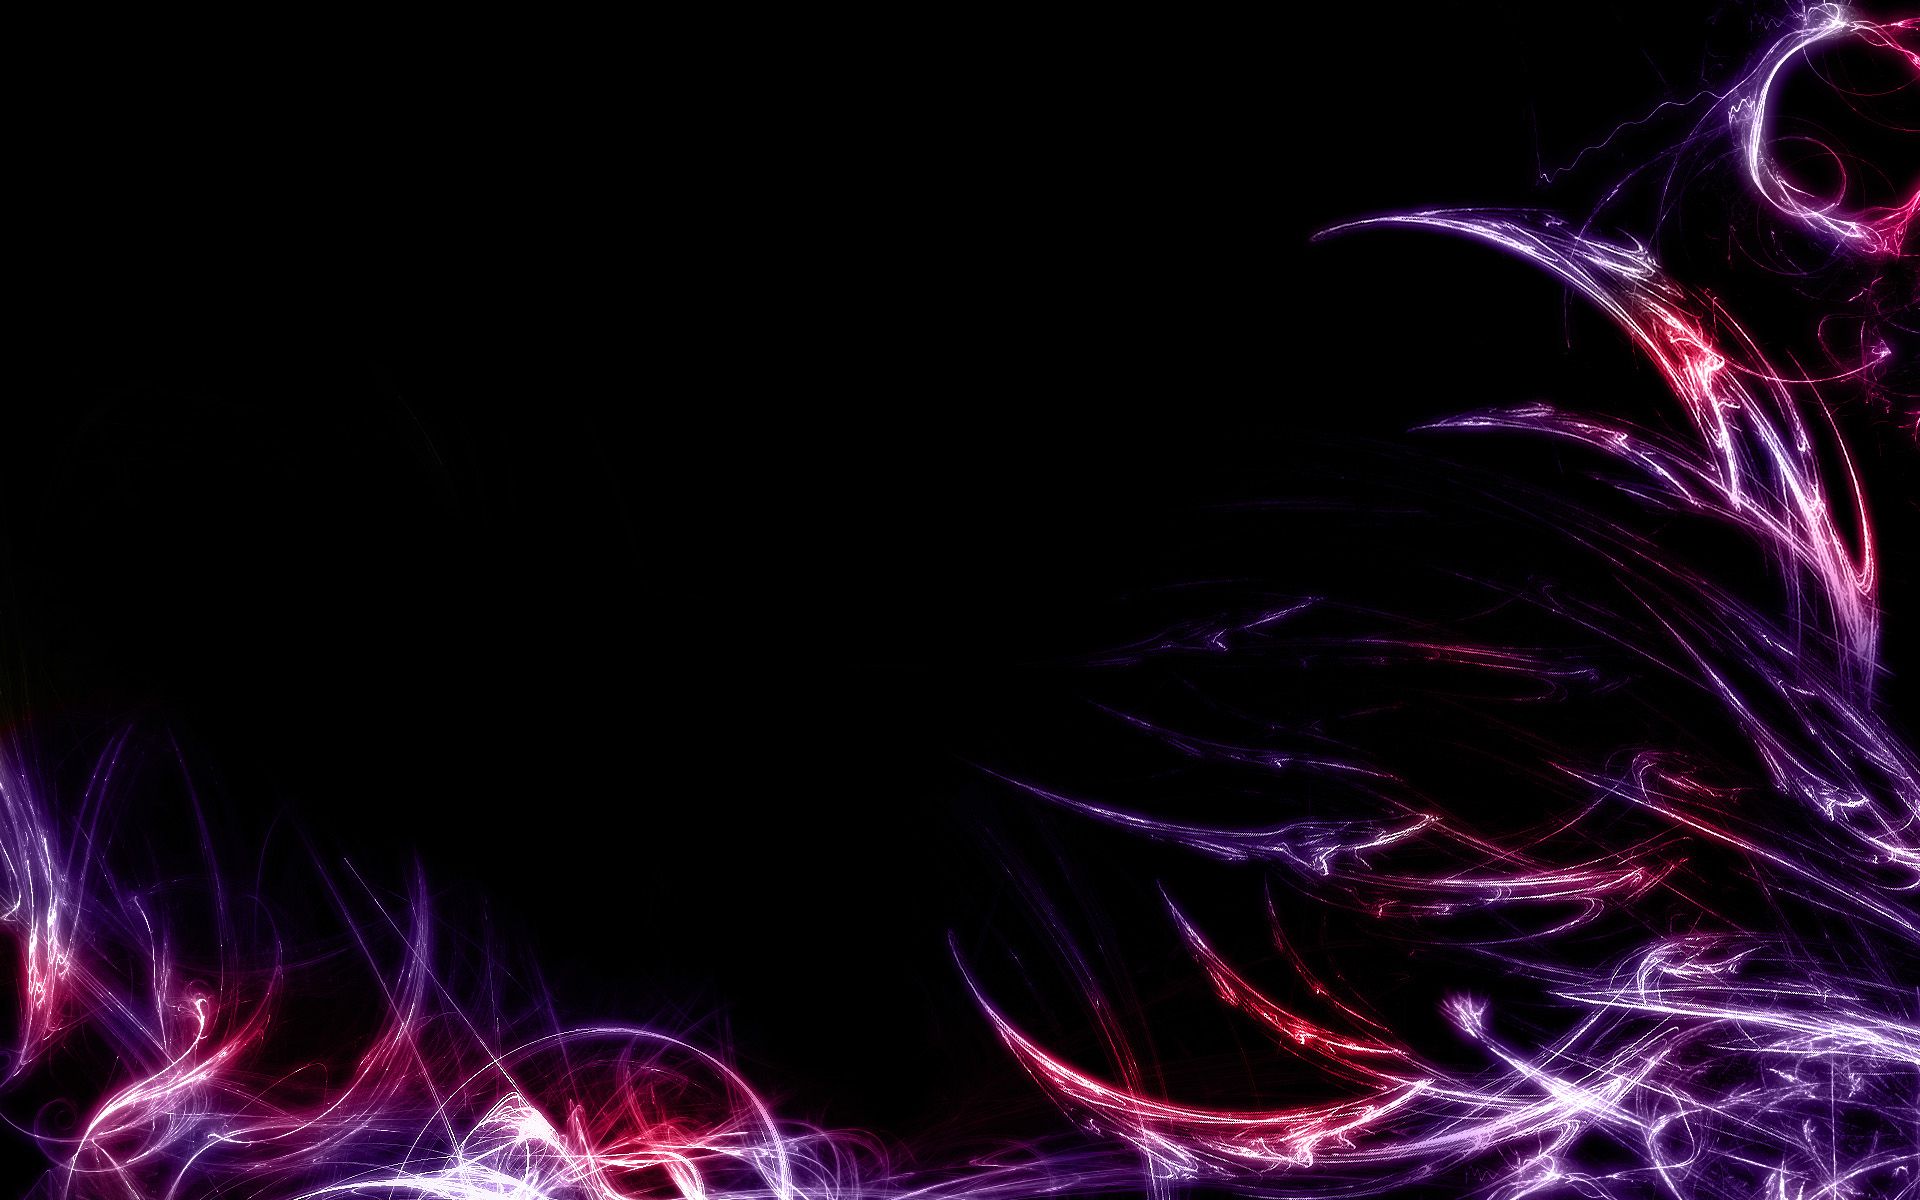 Electro House Hd Wallpapers